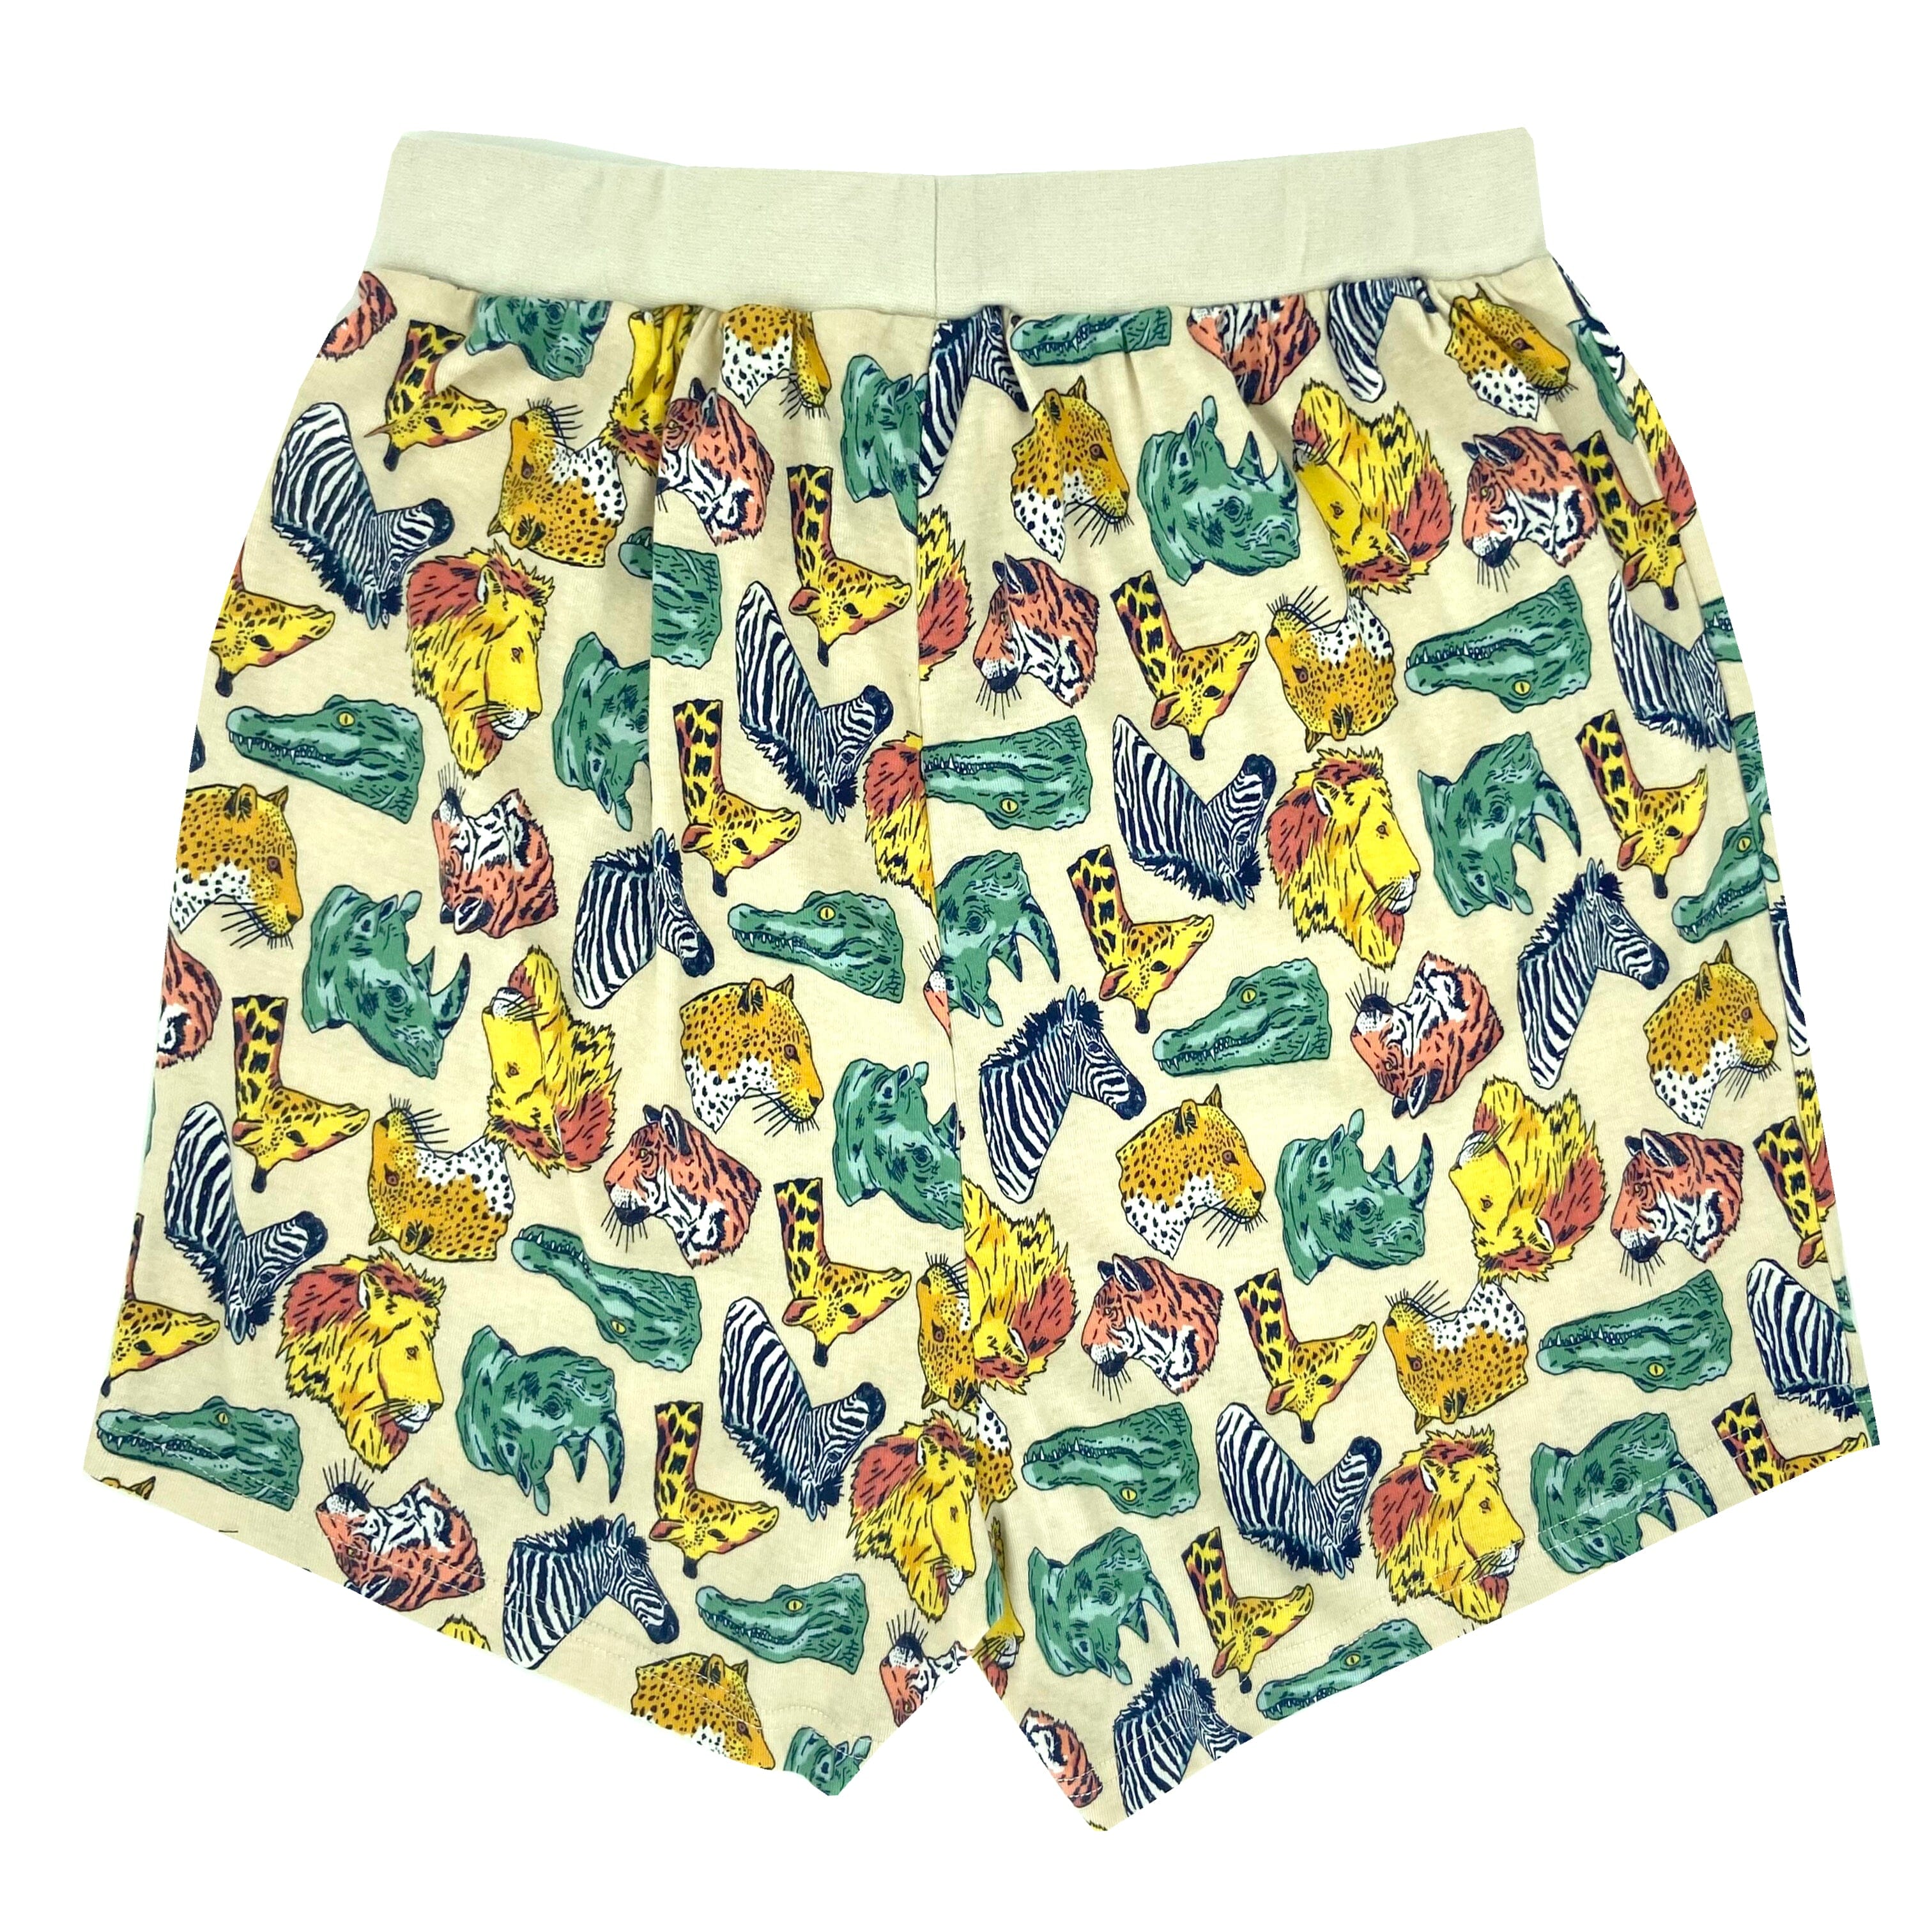 Buy Cool Animal Boxers Shorts. Tigers, Lions, Zebras & More 